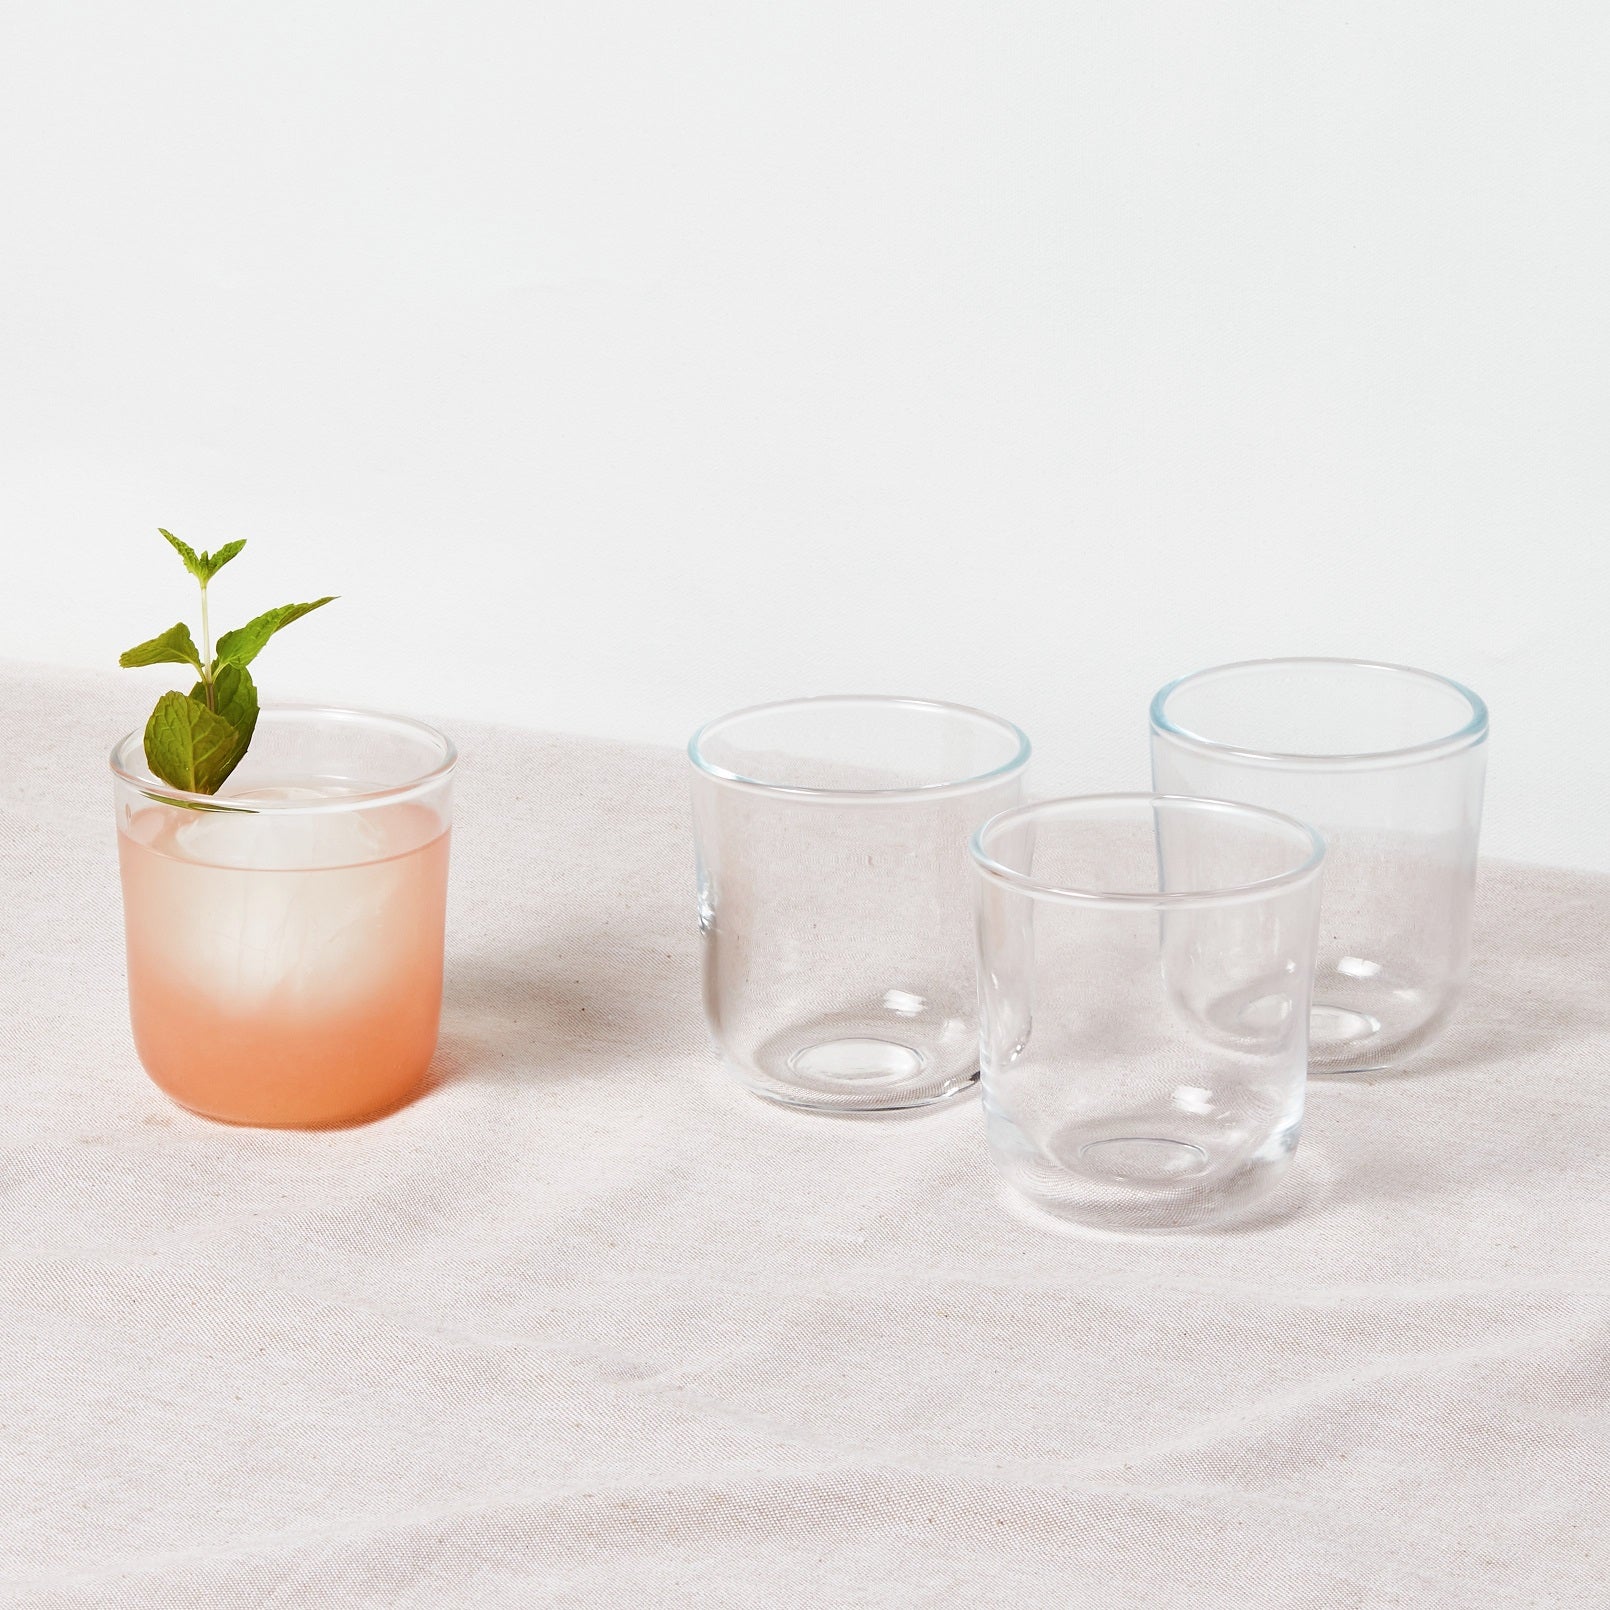 4 short glasses sitting on beige tablecloth. One glass has a pink cocktail in it and the other 3 glasses are empty.